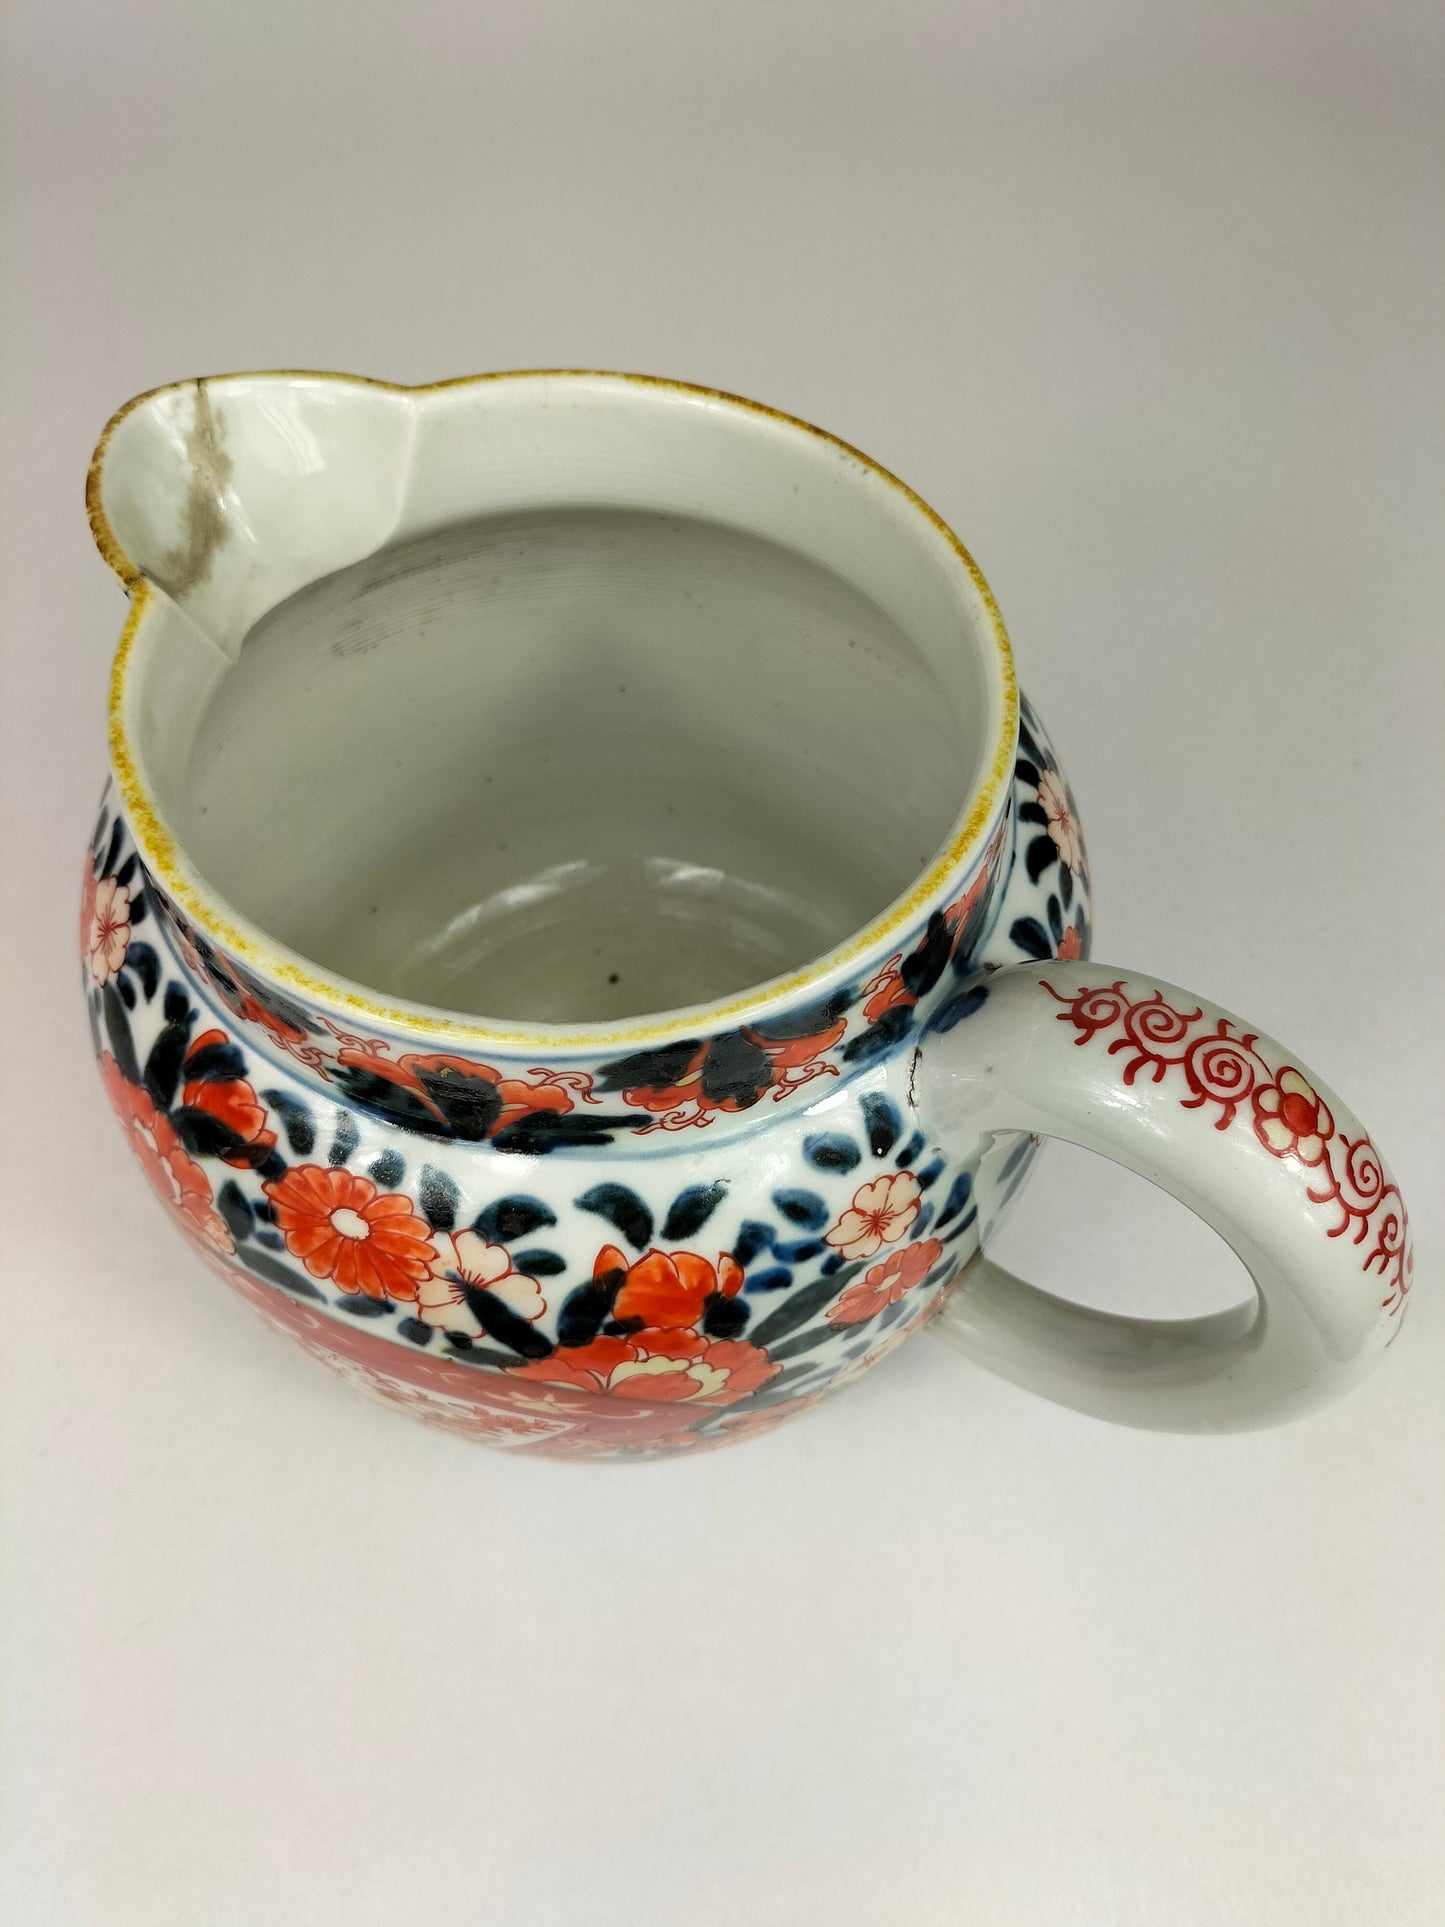 Large antique Japanese imari pitcher decorated with floral motifs // Meiji Period - 19th century